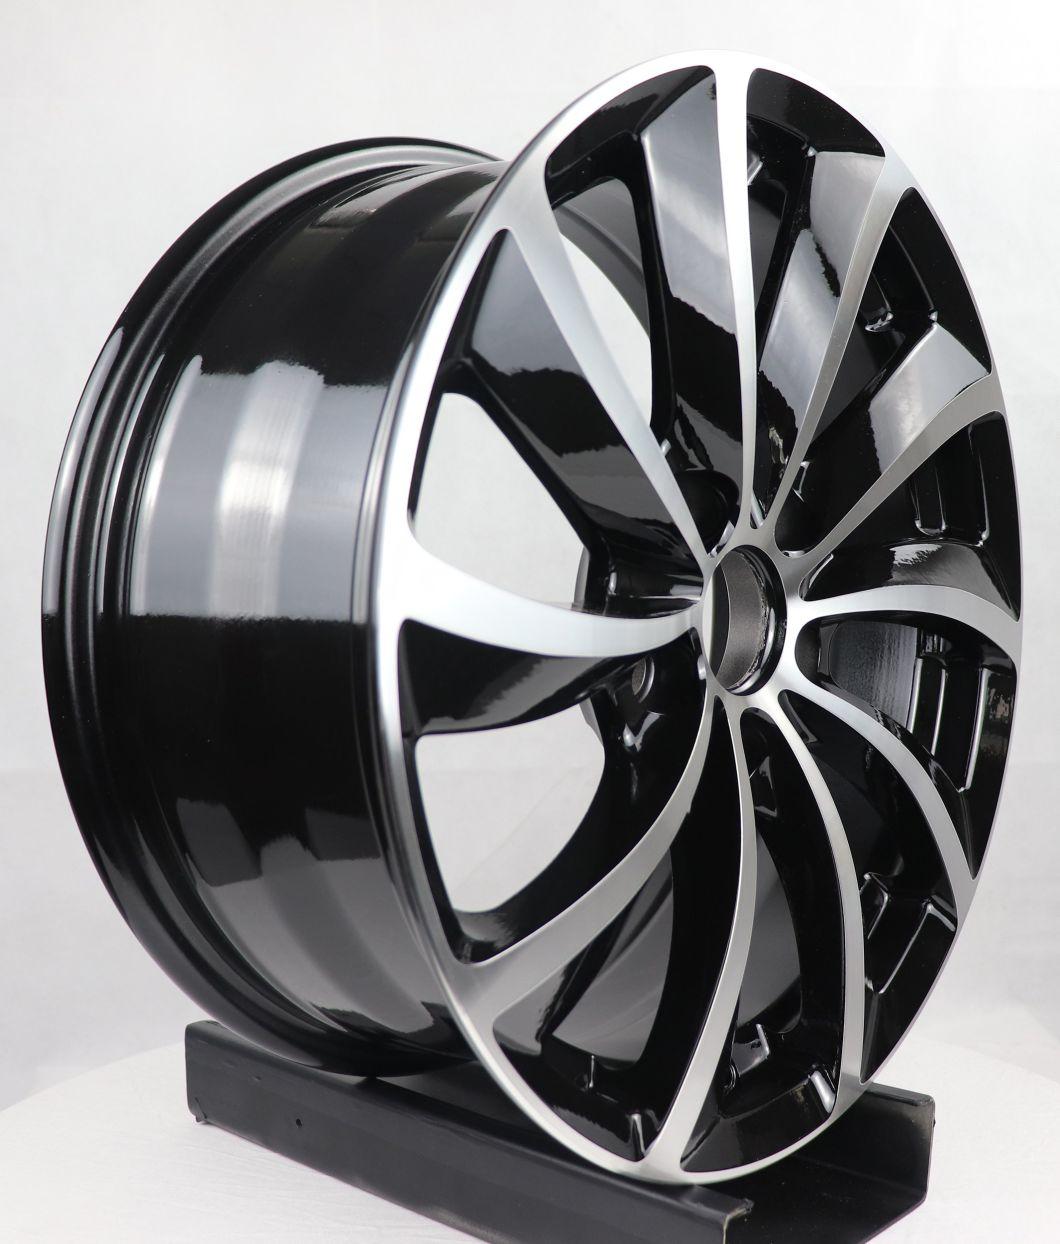 Best Selling Well Polish Casting Wheels for Car